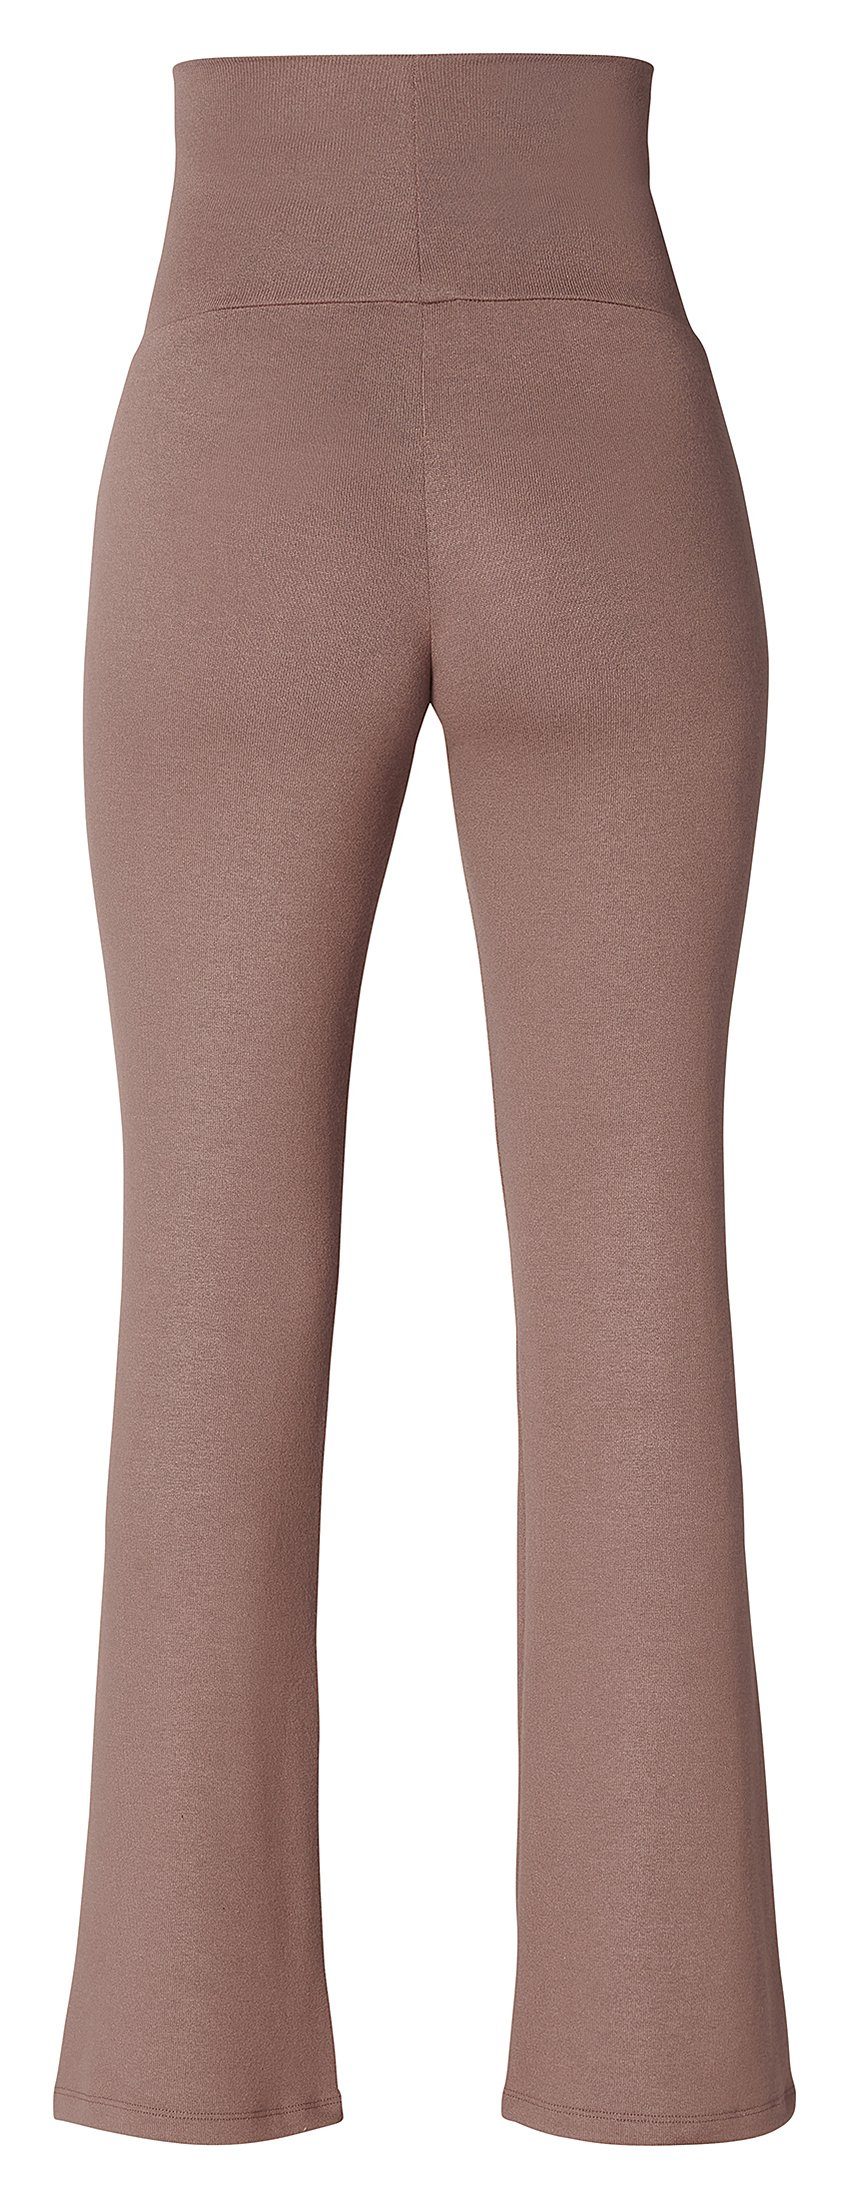 Noppies Umstandshose Deep Hose Casual flared (1-tlg) Luci Taupe Noppies